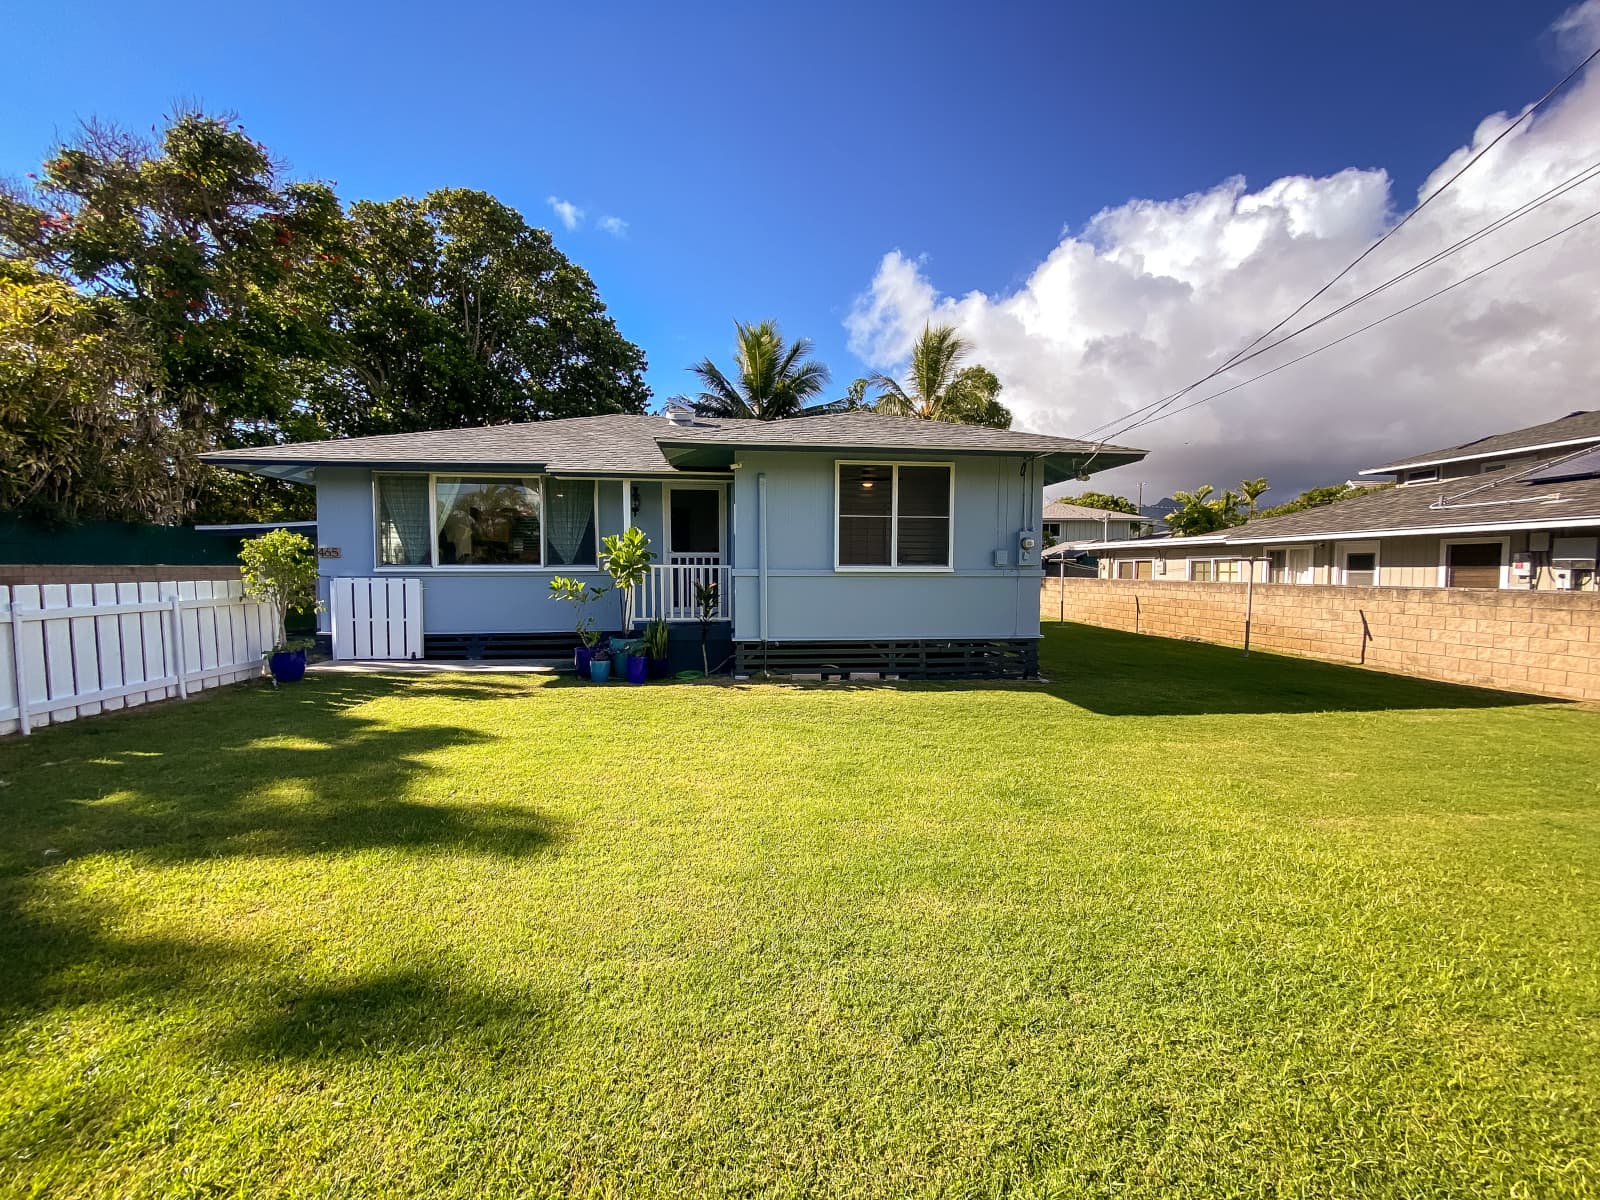 Hawaii Home with green grass lawn